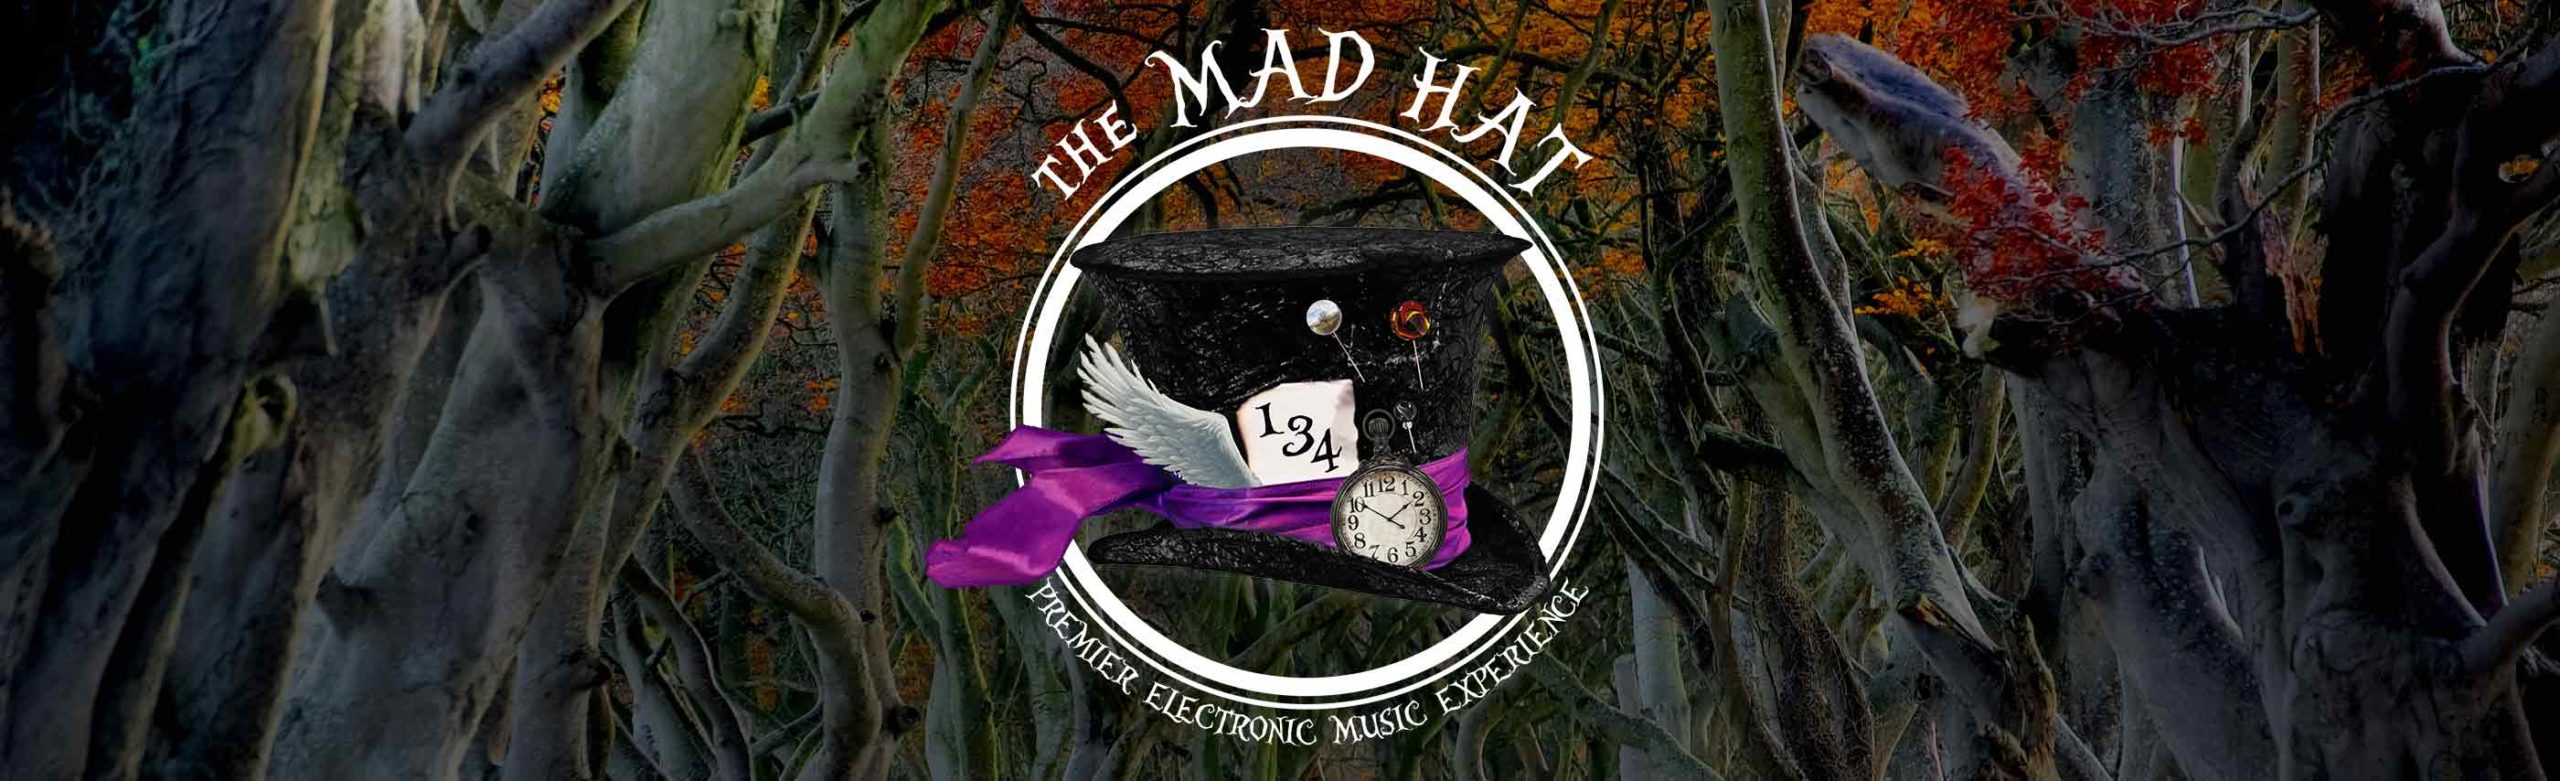 The Mad Hat: Vol. IV